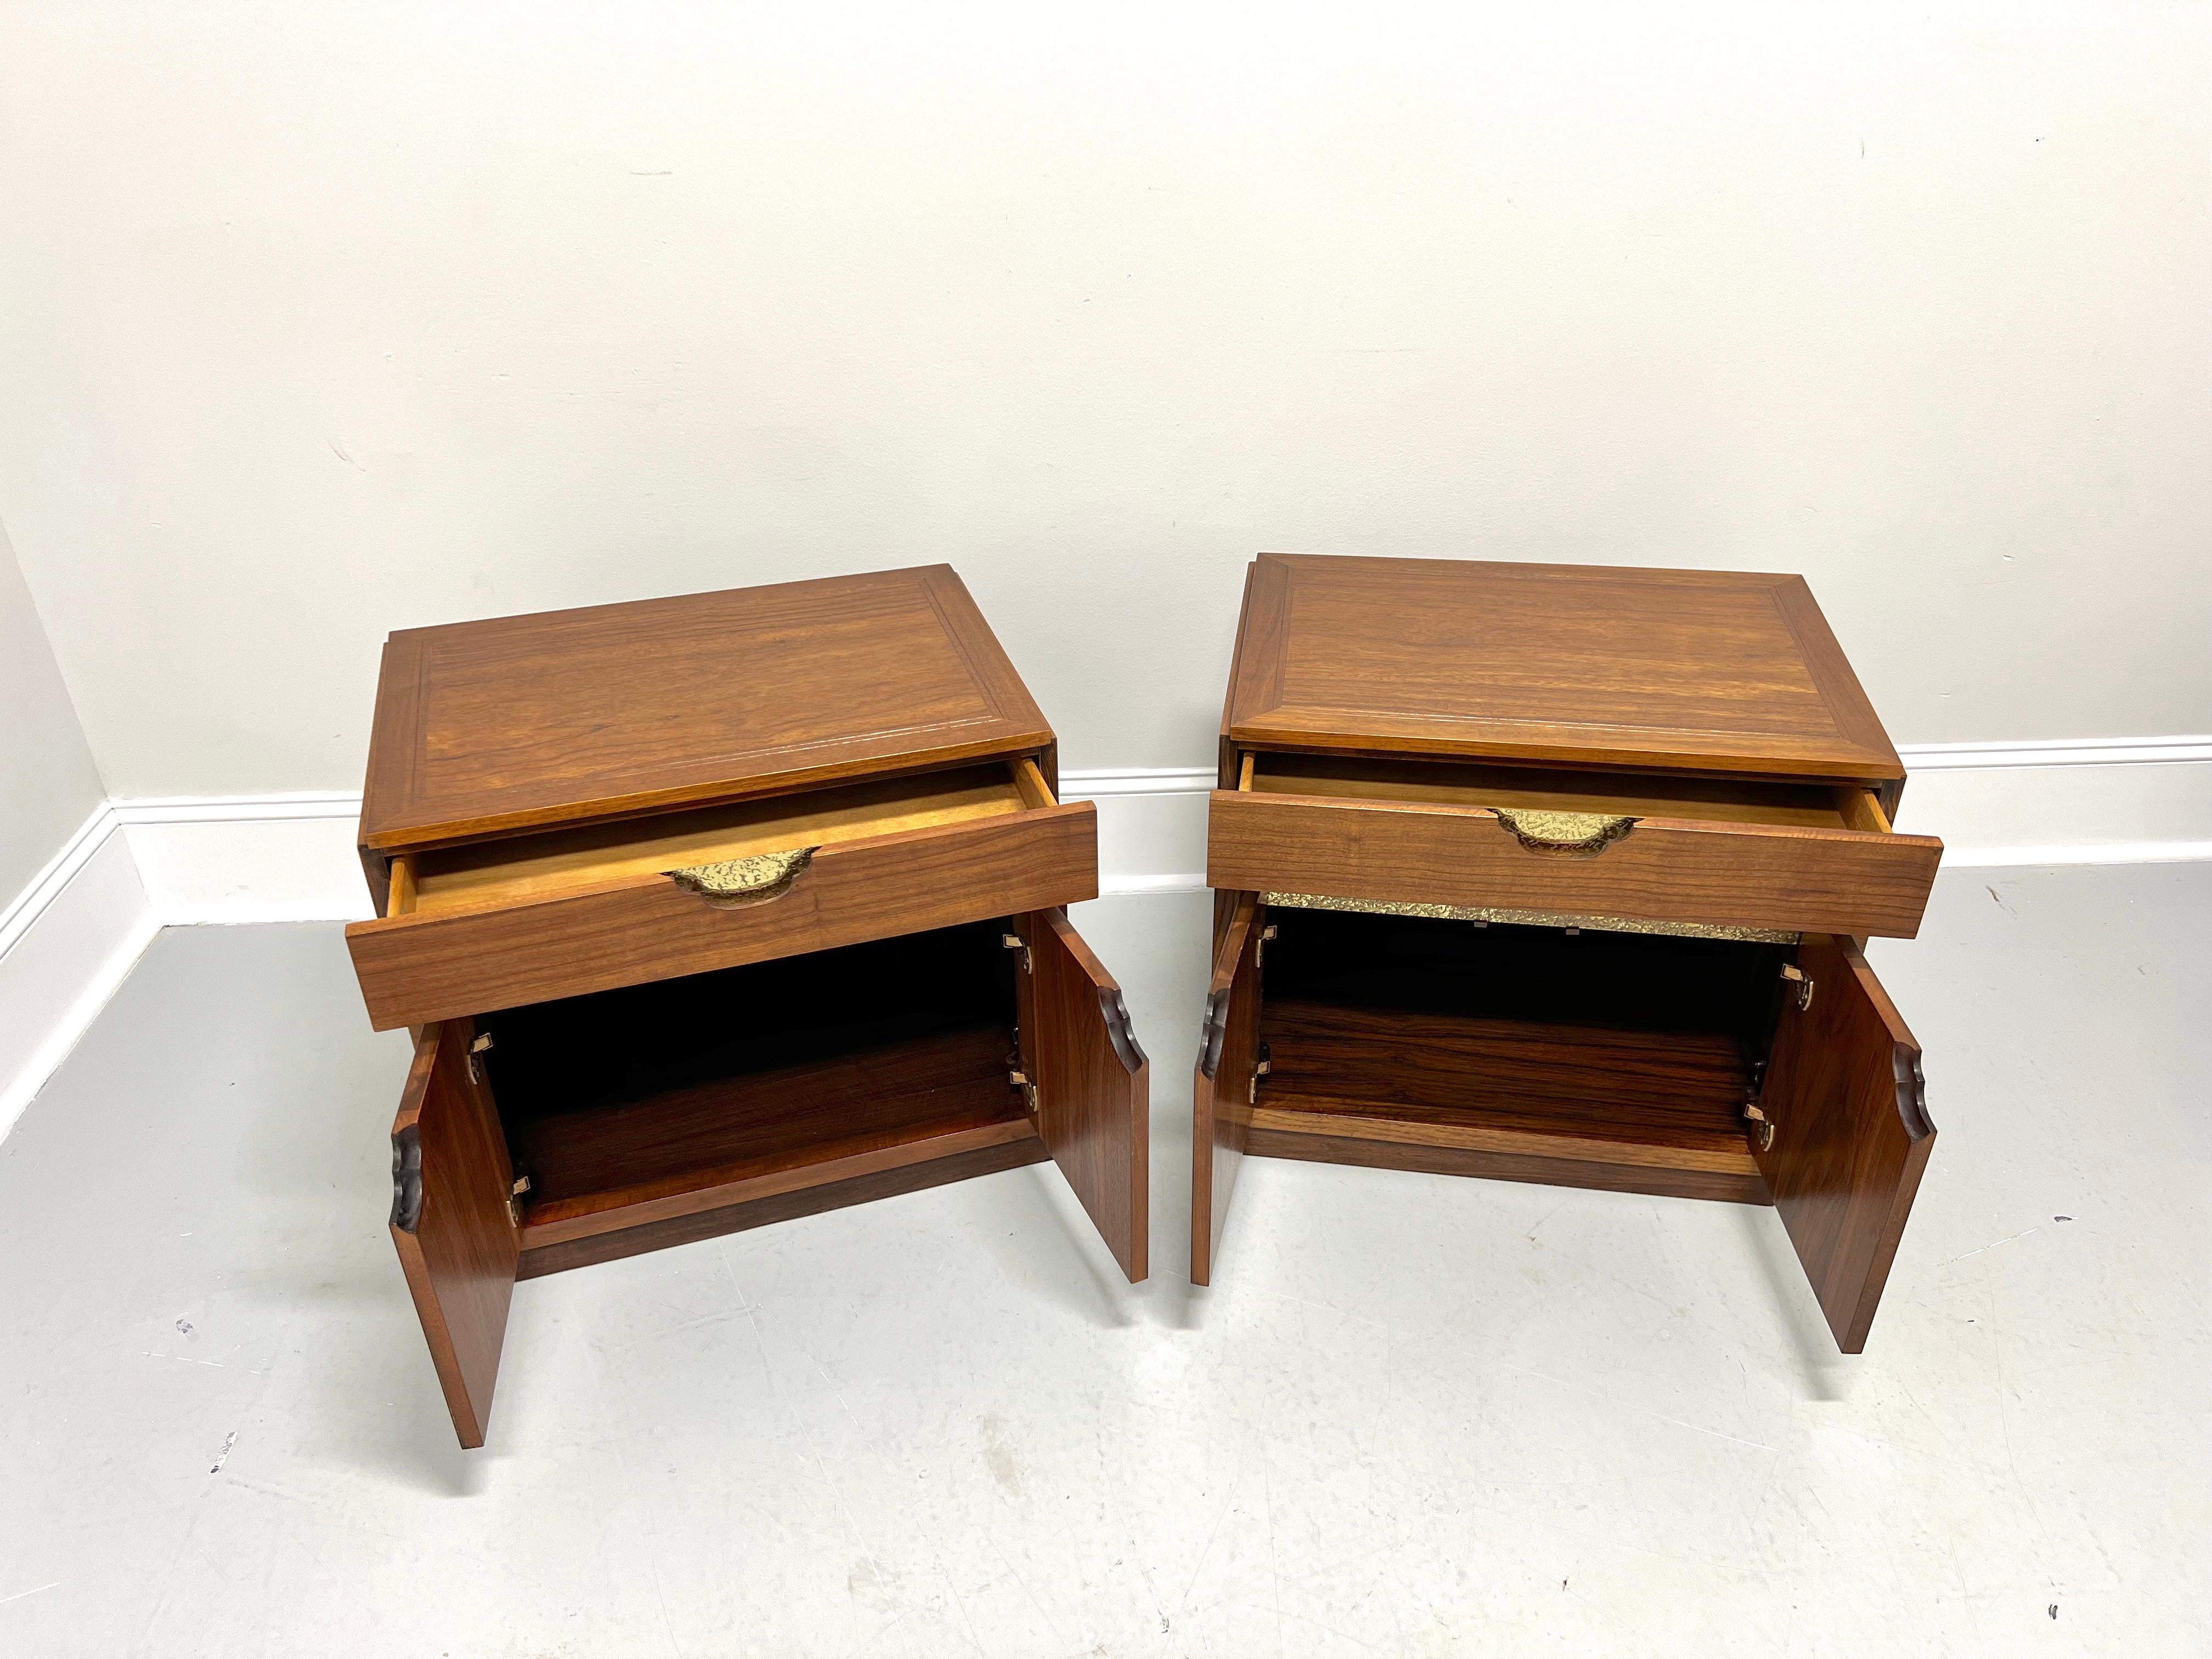 Brass BAKER Mid 20th Century Rosewood & Walnut Asian Inspired Nightstands - Pair For Sale